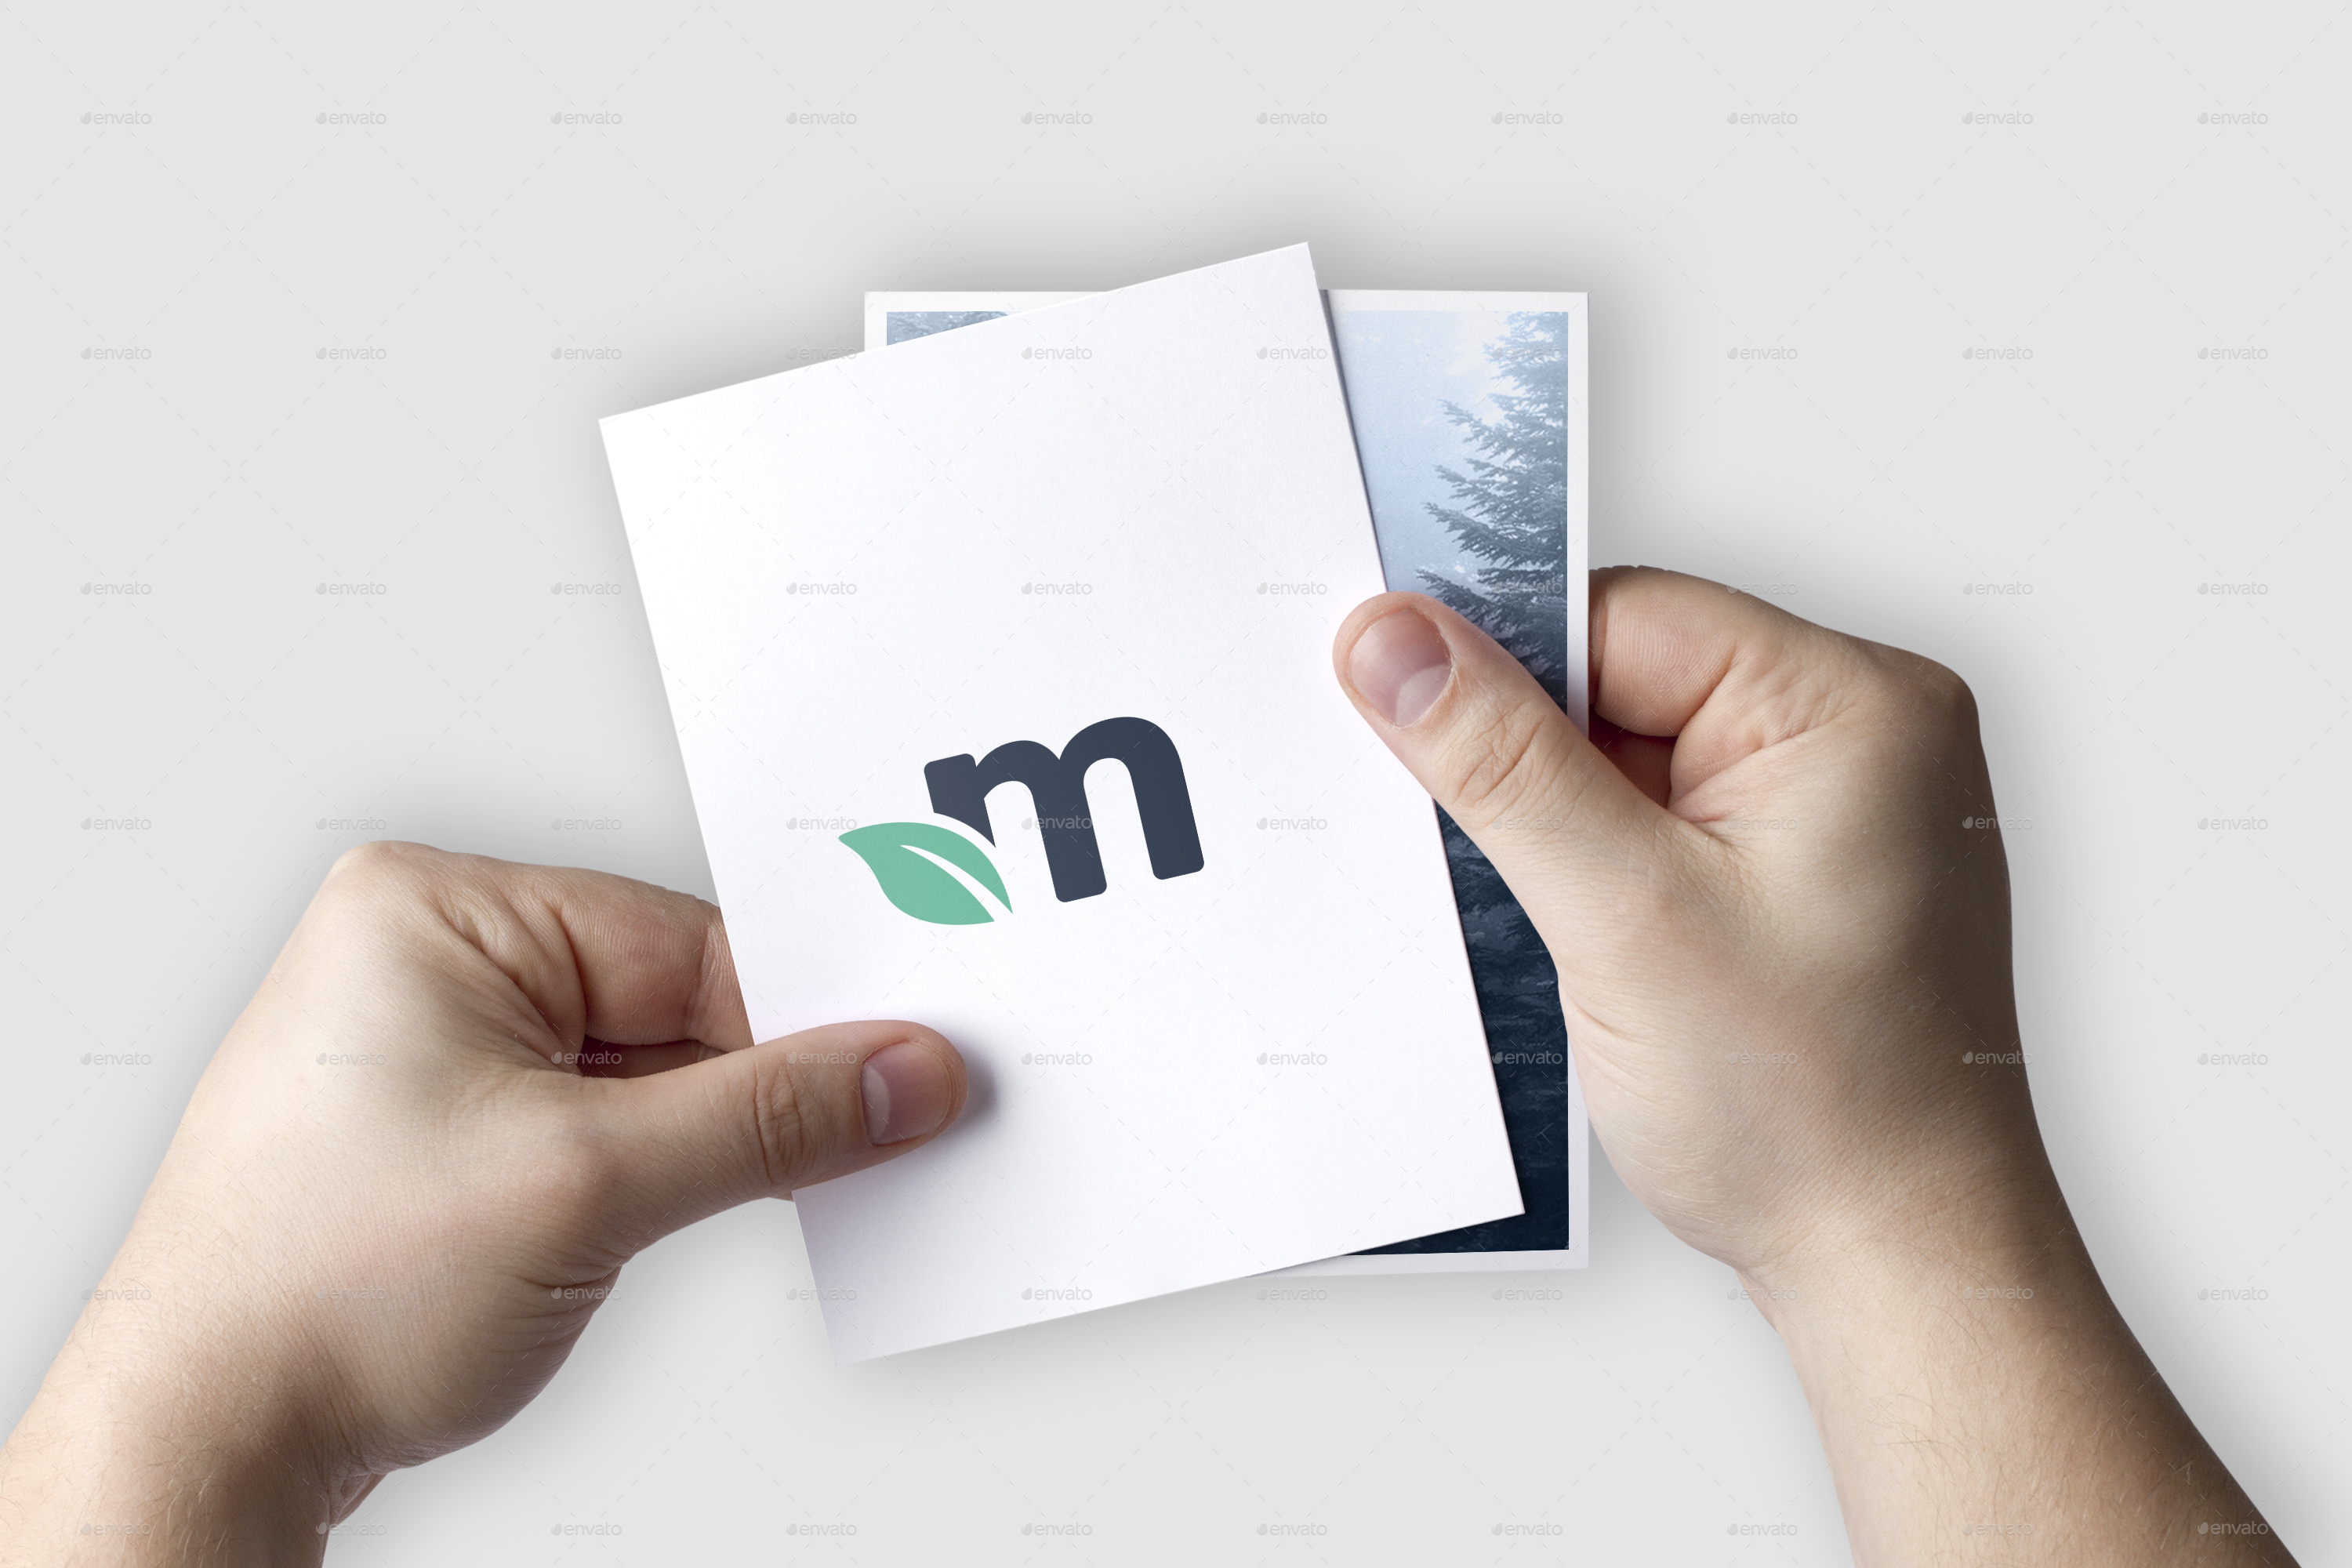 Download A6 Flyer Mockups By Mintmockups Graphicriver